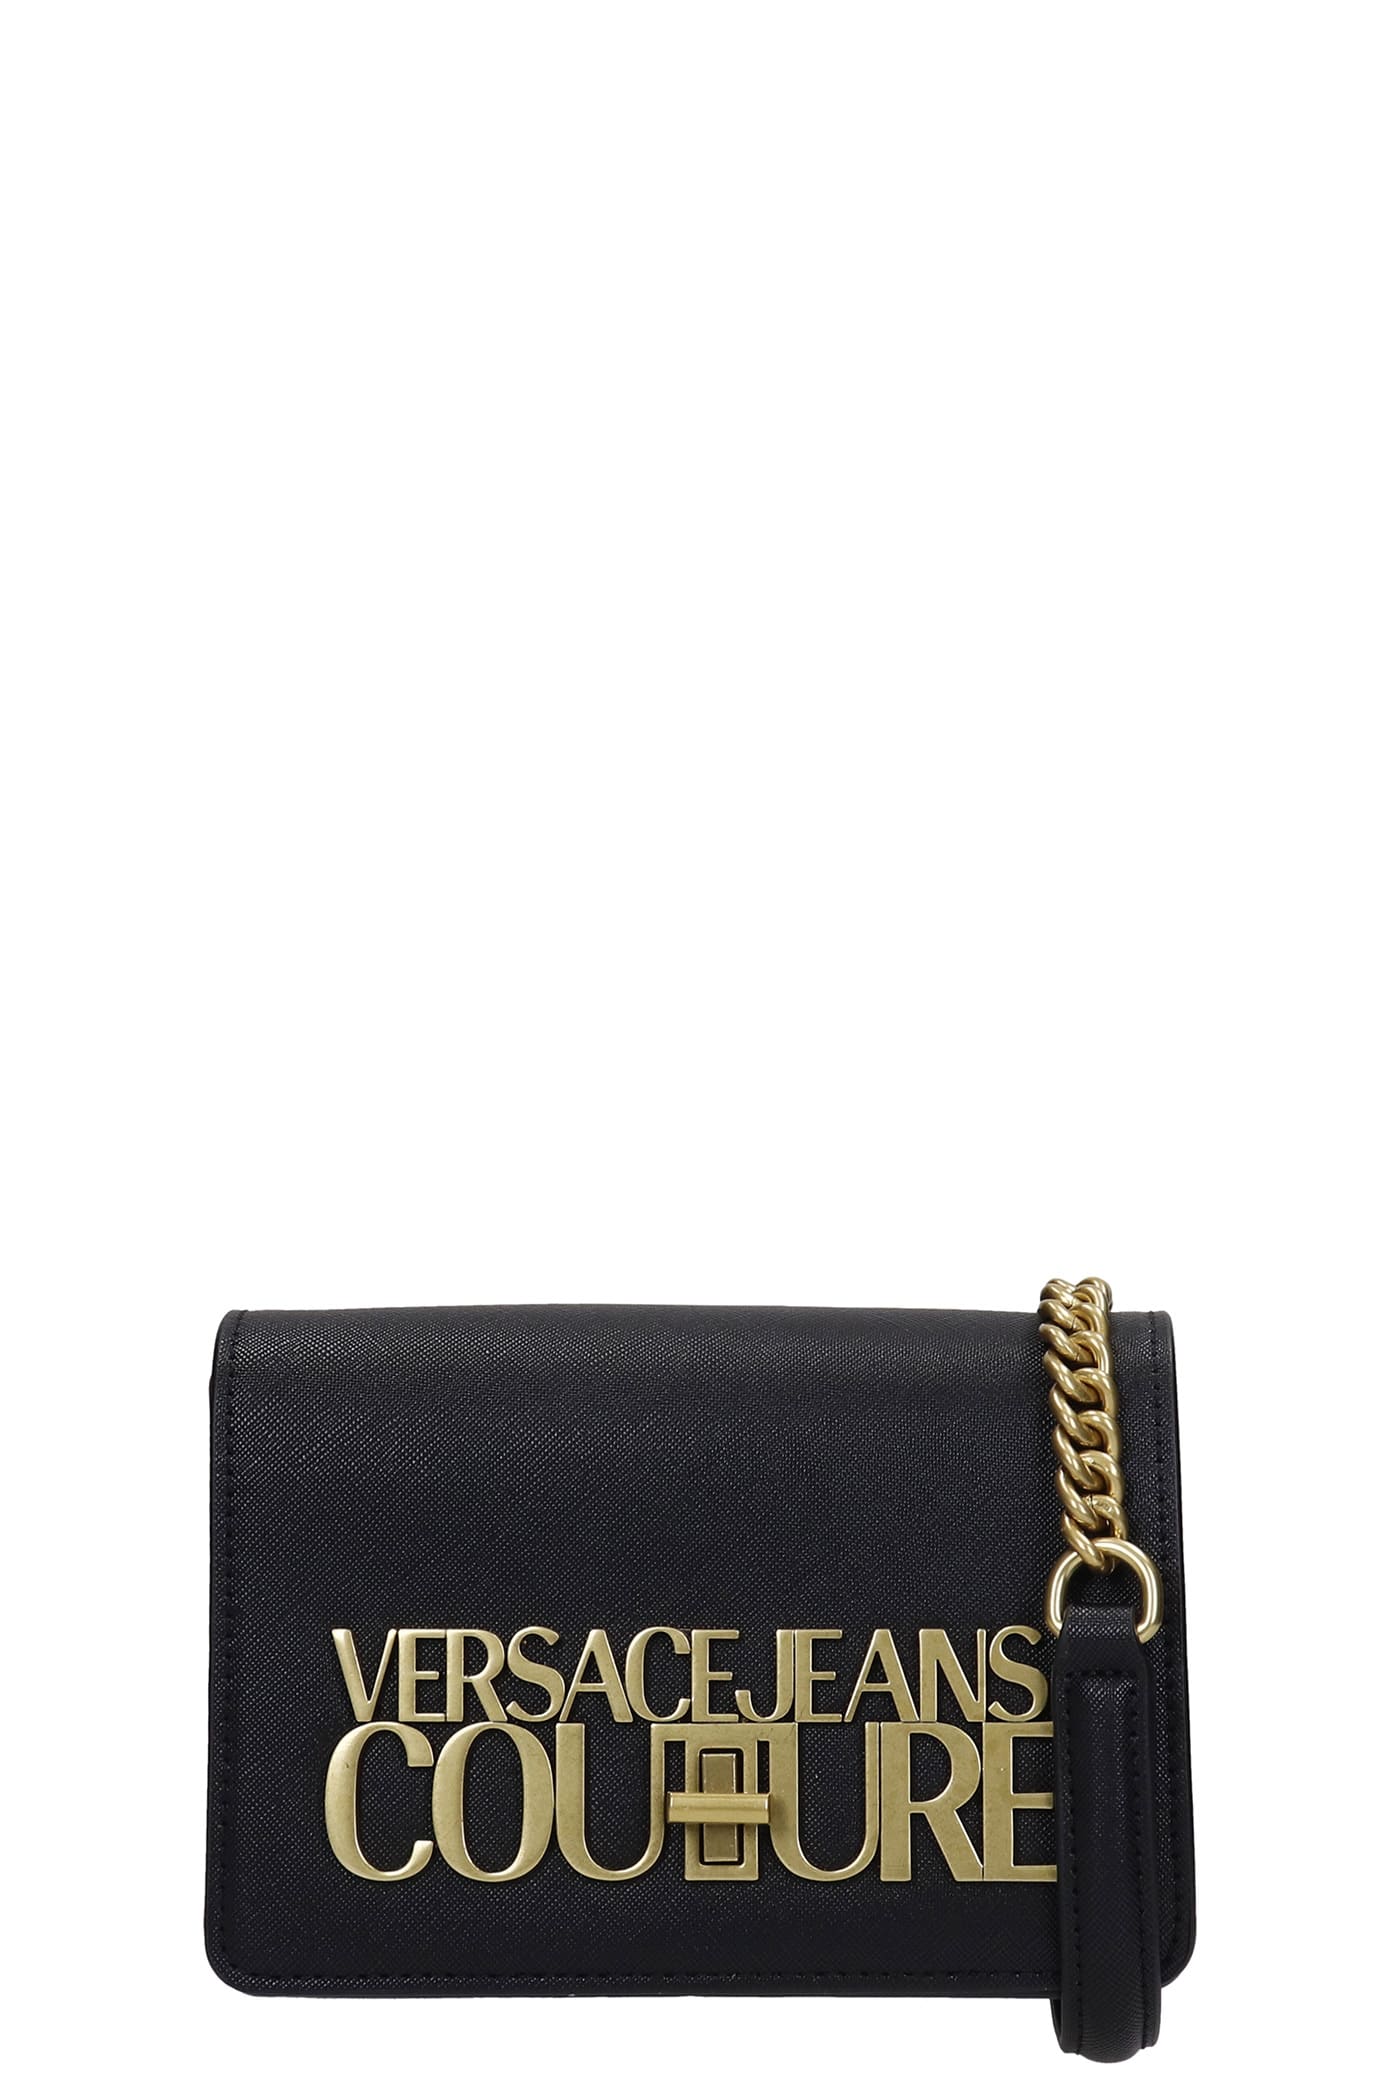 Versace Jeans Couture Shoulder Bag In Black Faux Leather